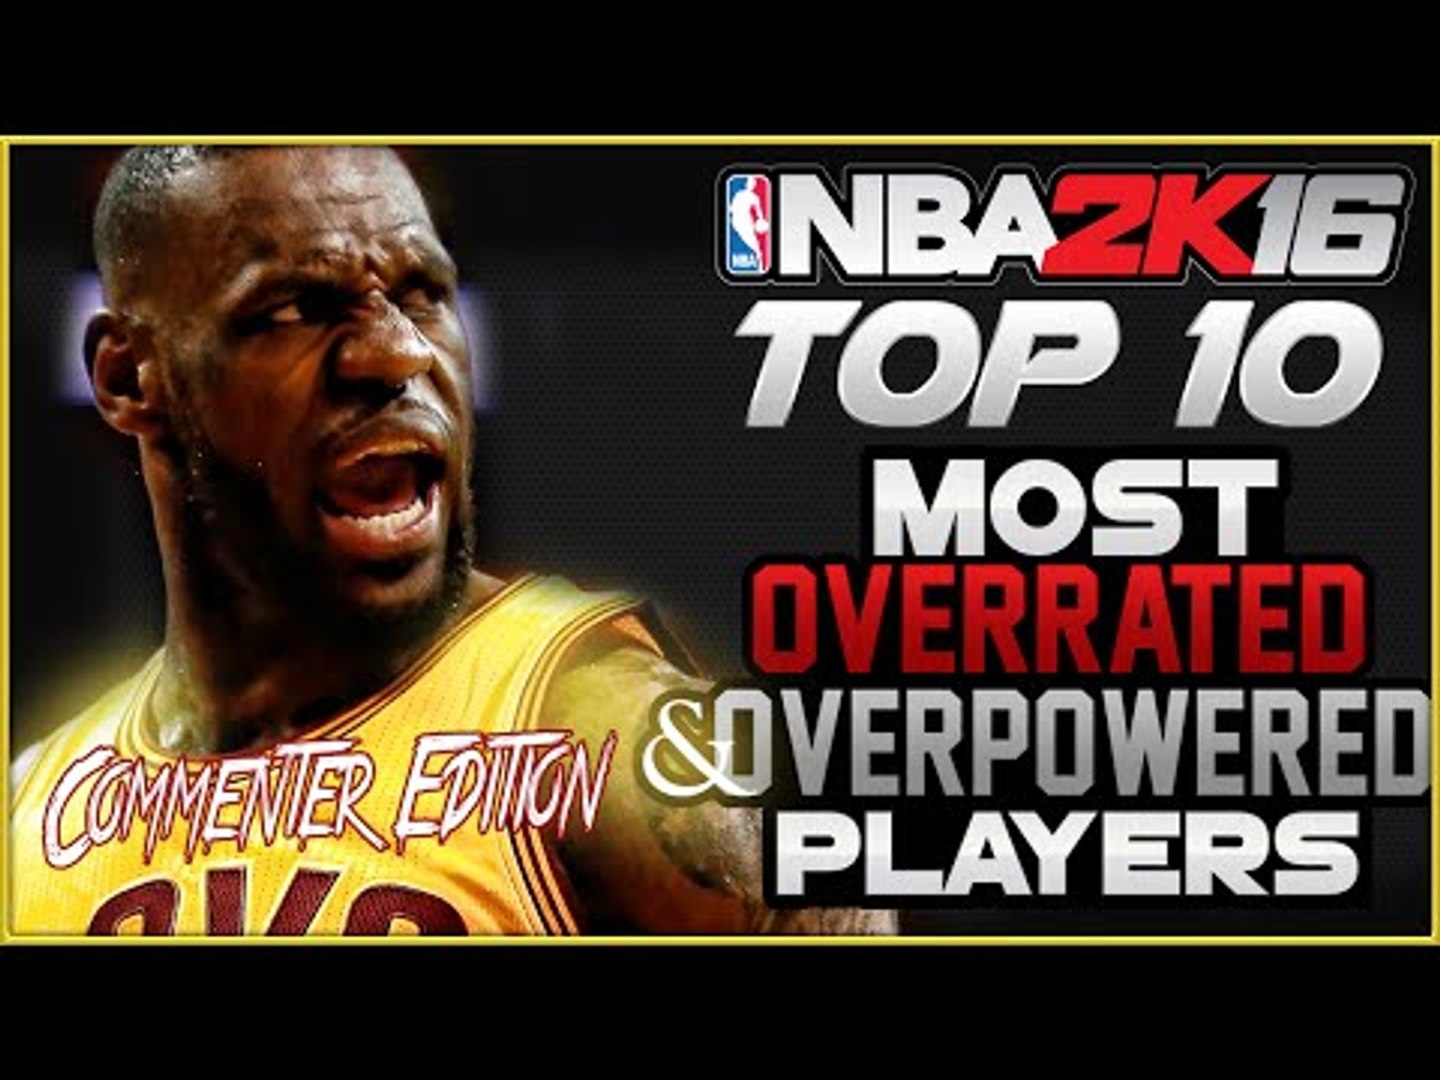 ⁣NBA 2K16 Top 10 Most OVERRATED and OVER POWERED Players: COMMENTER EDITION!